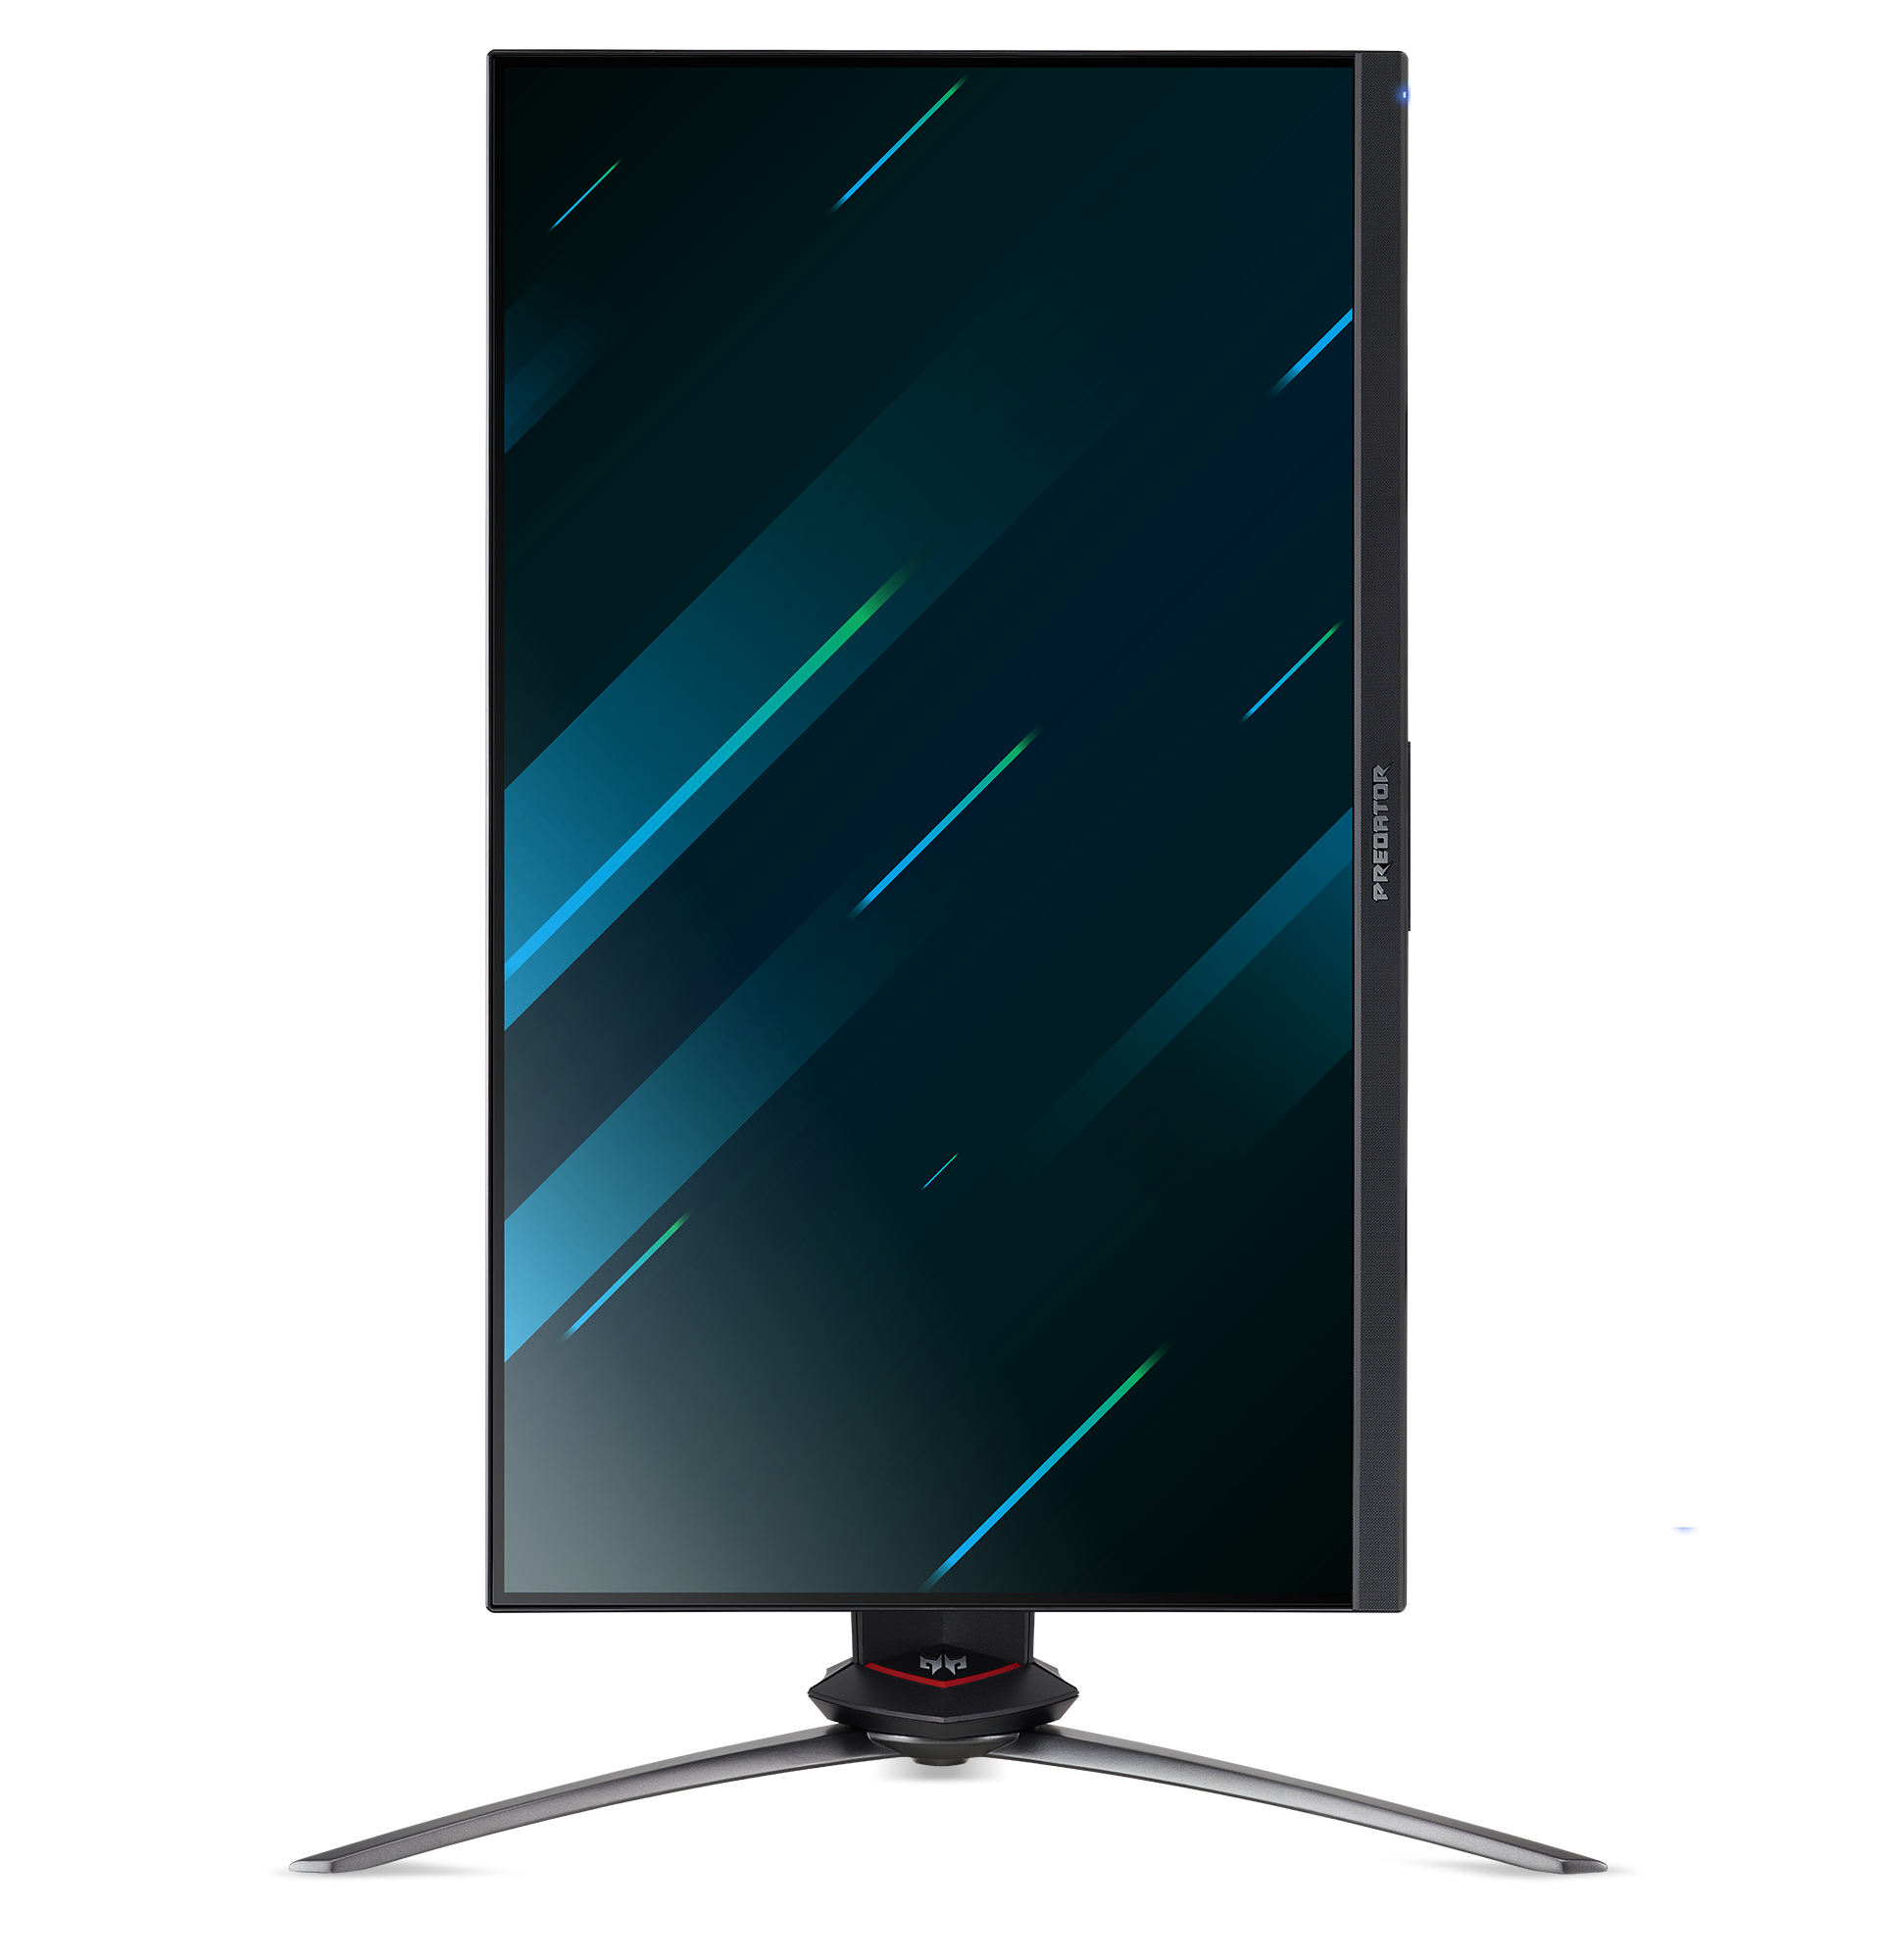 Acer Predator XB273 GZbmiiprx 27" FHD (1920 x 1080) IPS Monitor with NVIDIA G-SYNC Compatible, HDR400, Up to 0.5ms (G to G), Overclock to 280Hz  (1 x Display Port & 2 x HDMI Ports) - image 3 of 9